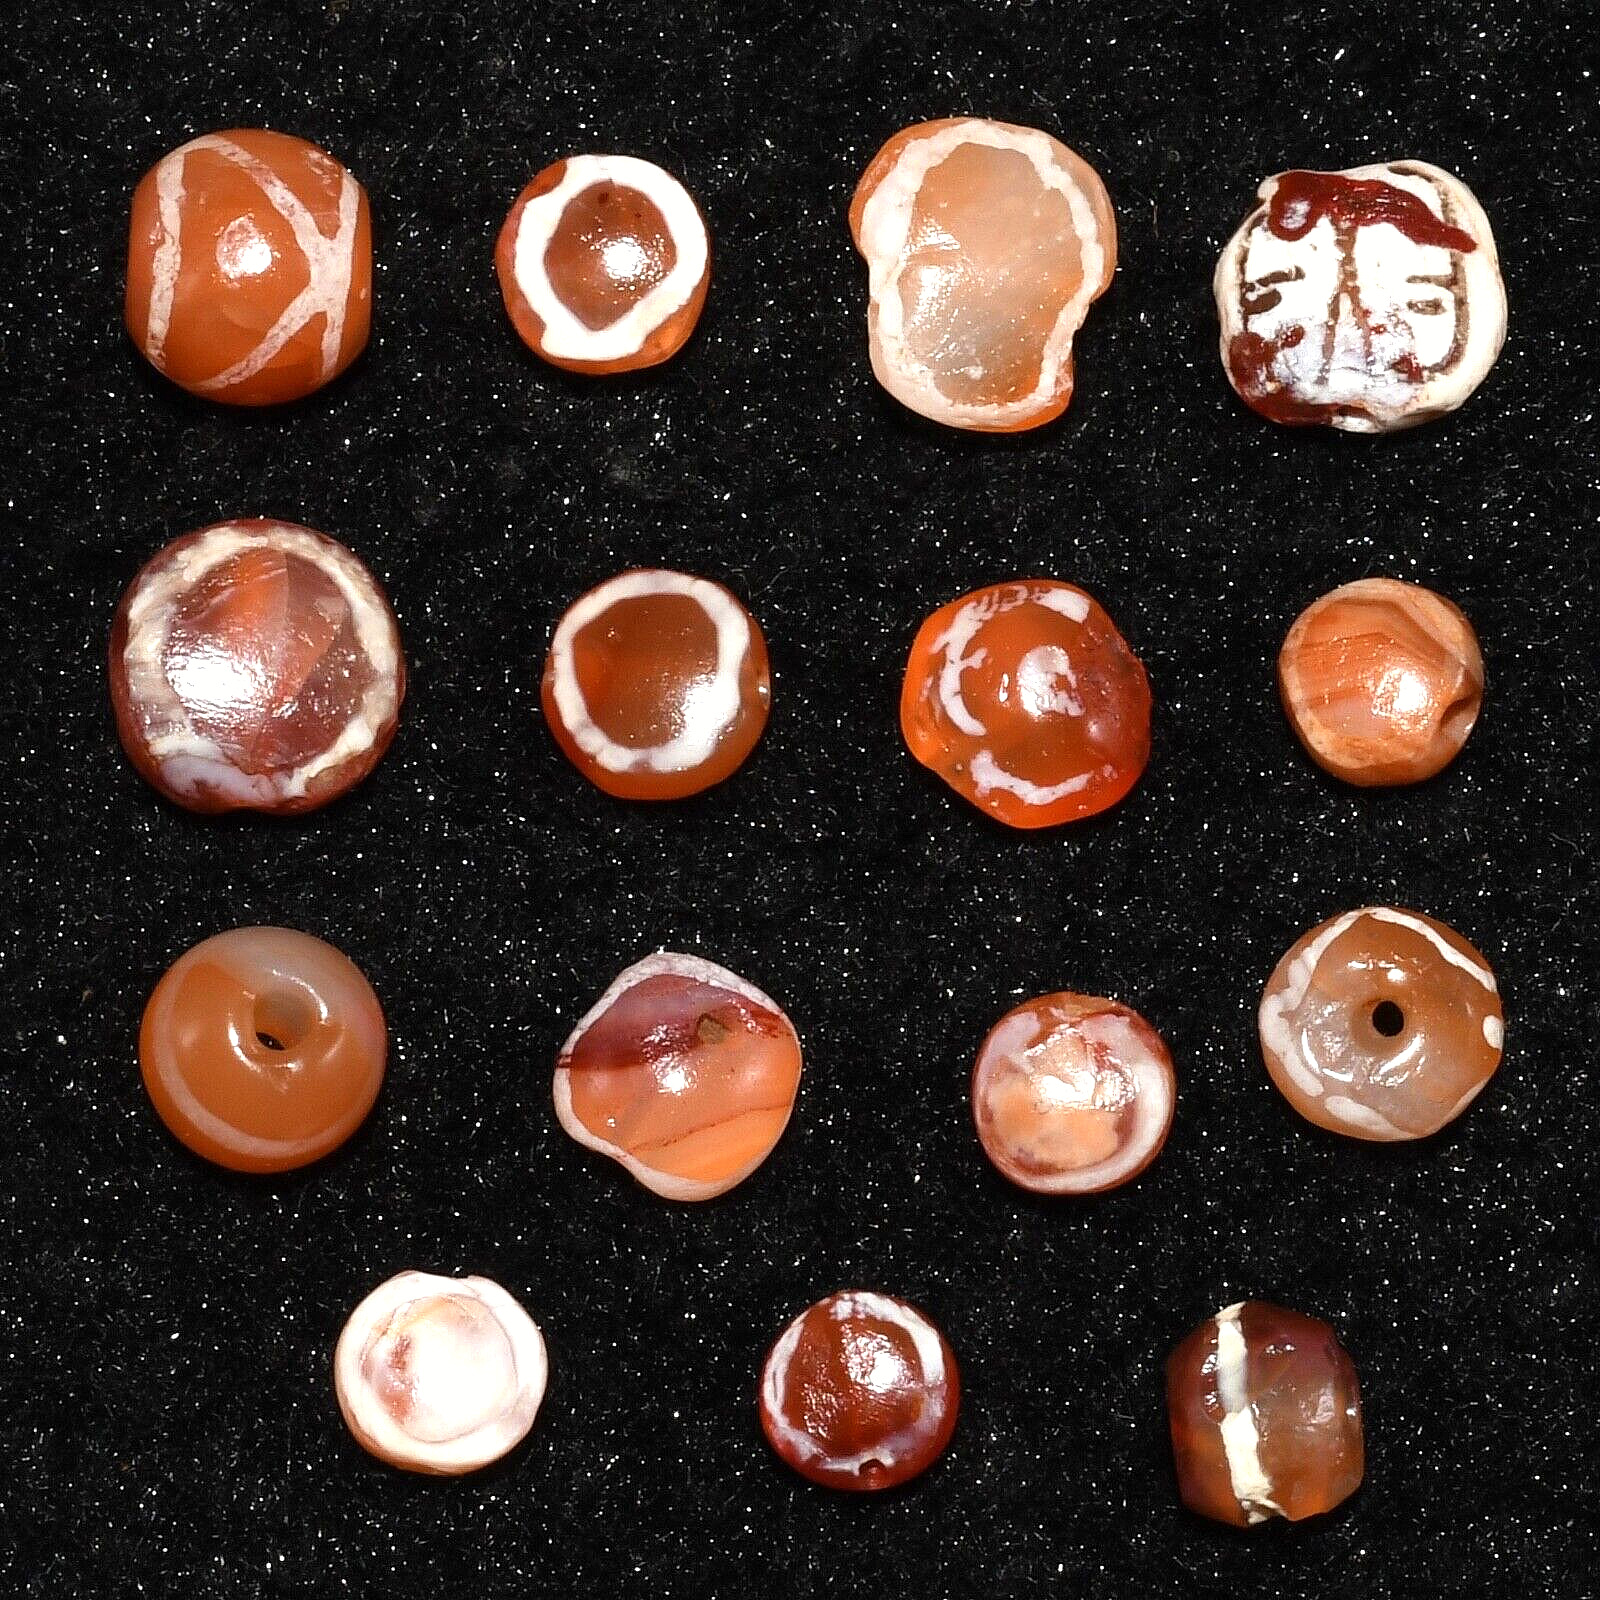 15 Ancient Pyu Culture Etched Carnelian Beads in Good Condition over 1000 Years